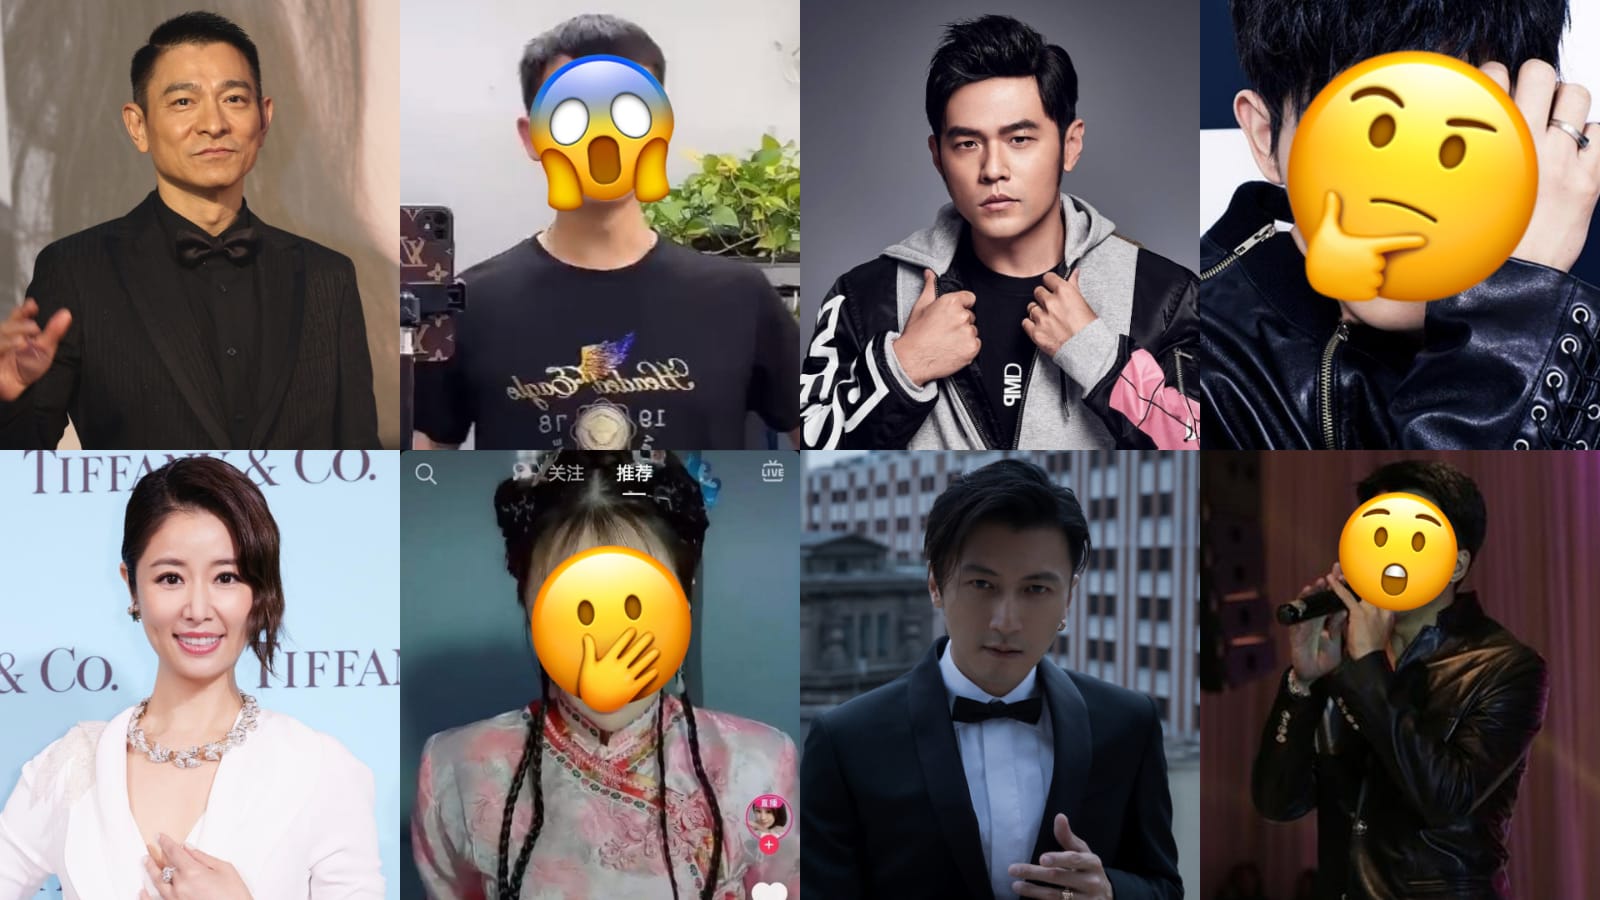 These Lookalikes Of Andy Lau, Jay Chou & Other Superstars Will Make You Do A Double Take